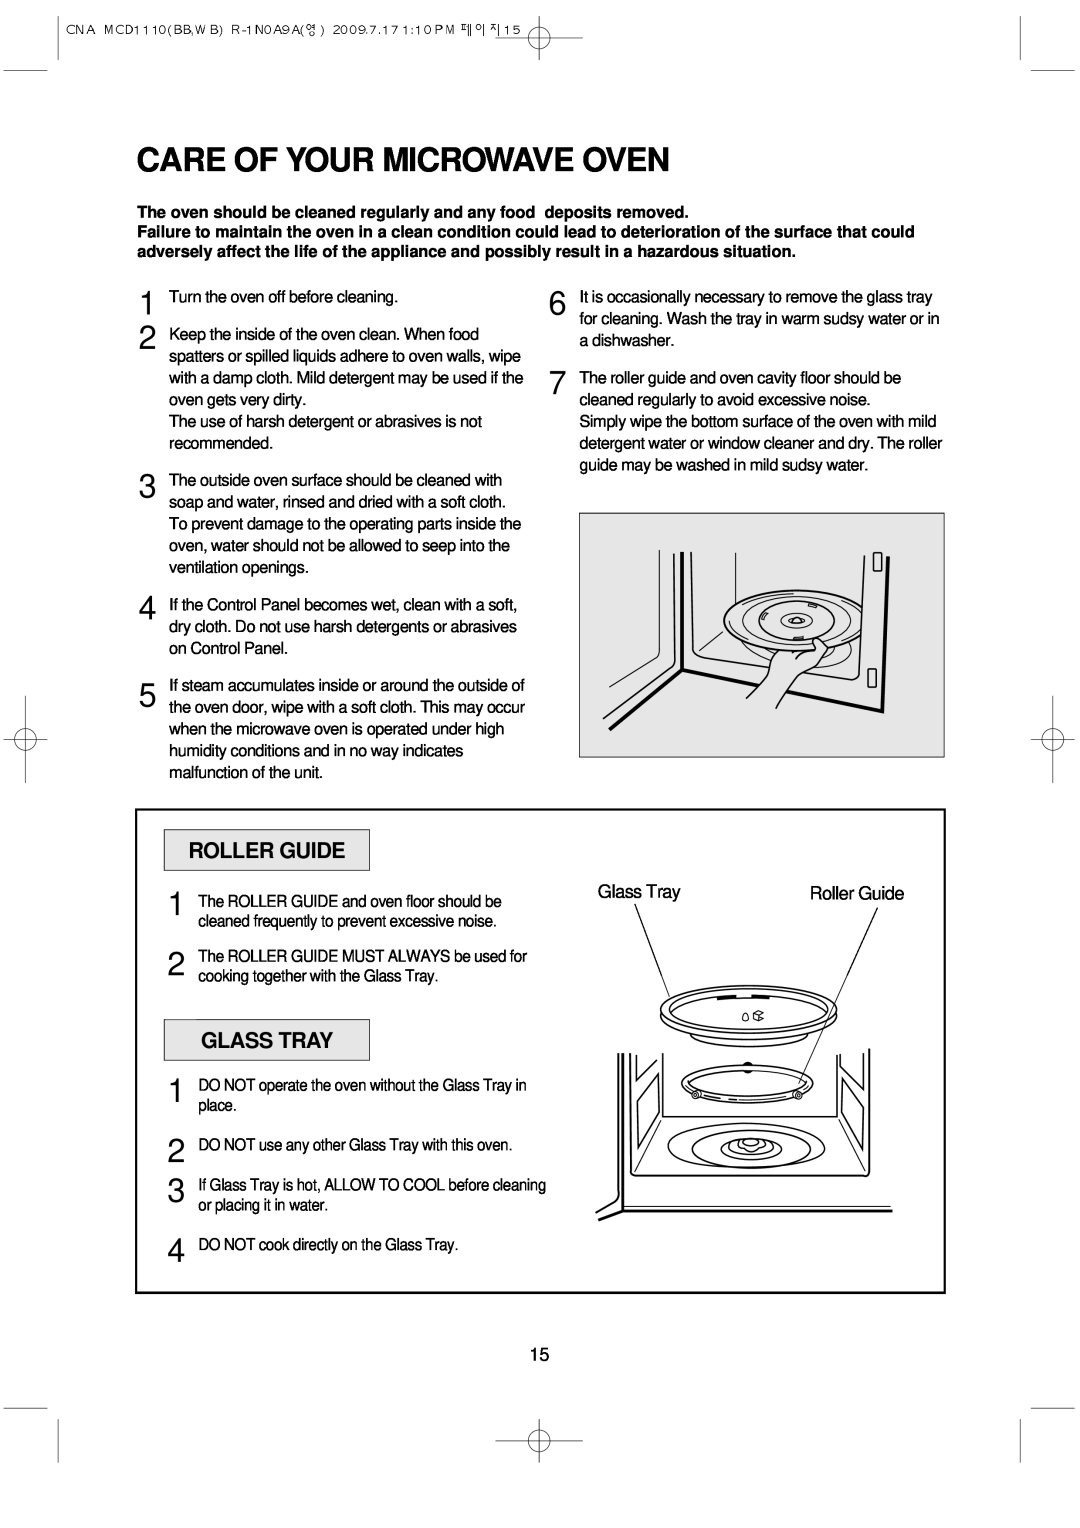 Magic Chef MCD1110WB manual Care Of Your Microwave Oven, Roller Guide, Glass Tray 